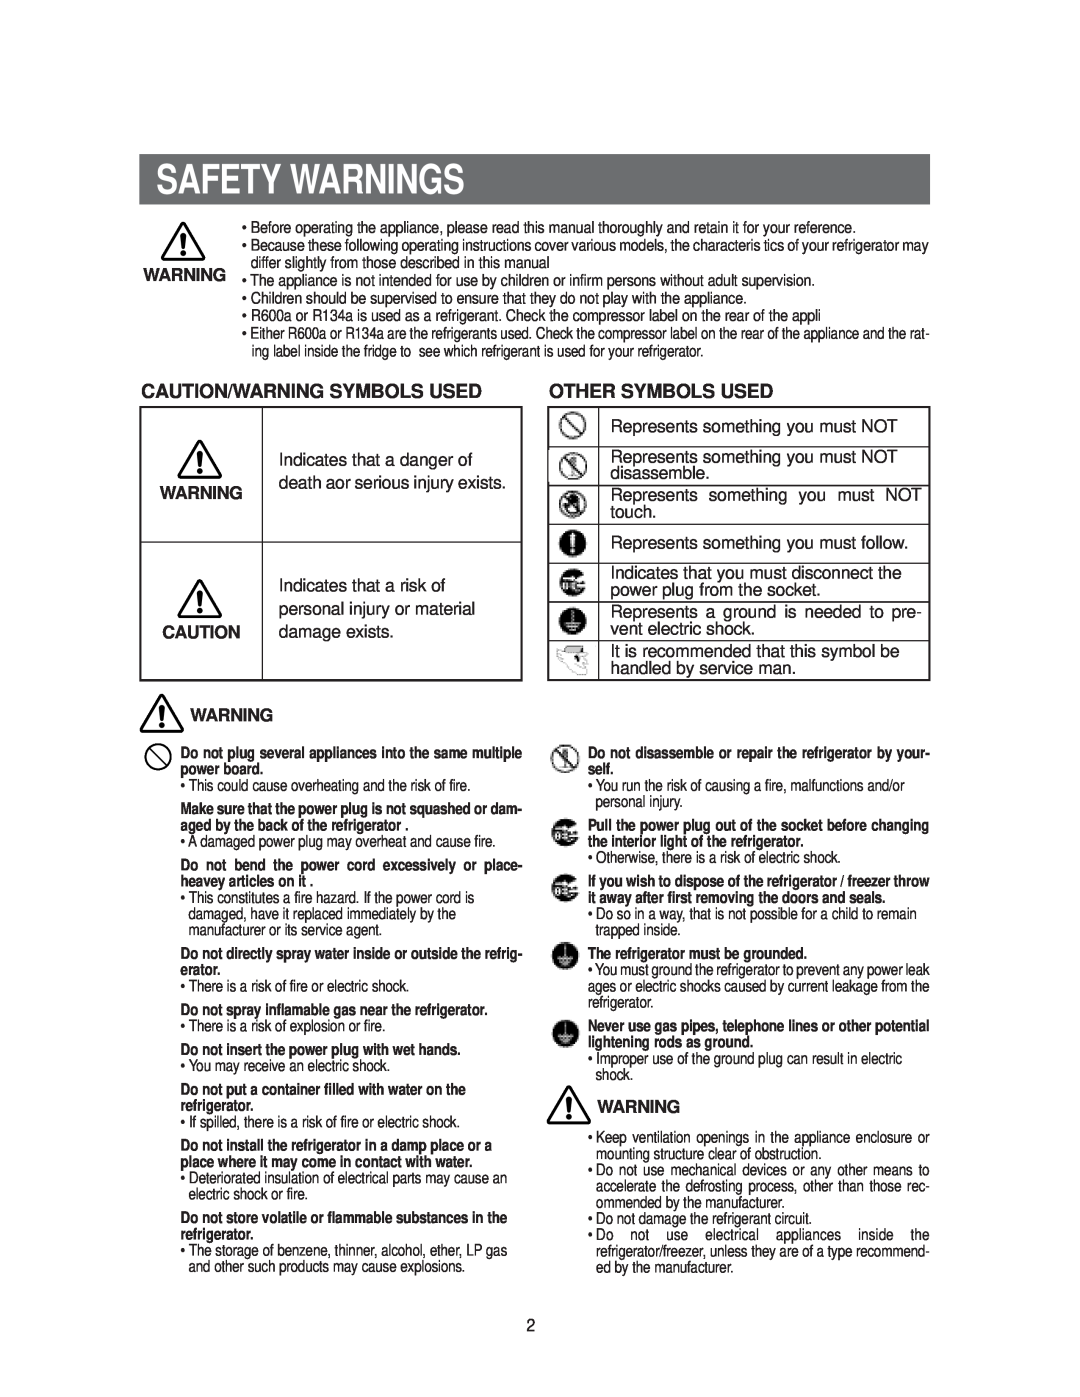 Samsung RS20**** owner manual Safety Warnings, Caution/Warning Symbols Used, Other Symbols Used 